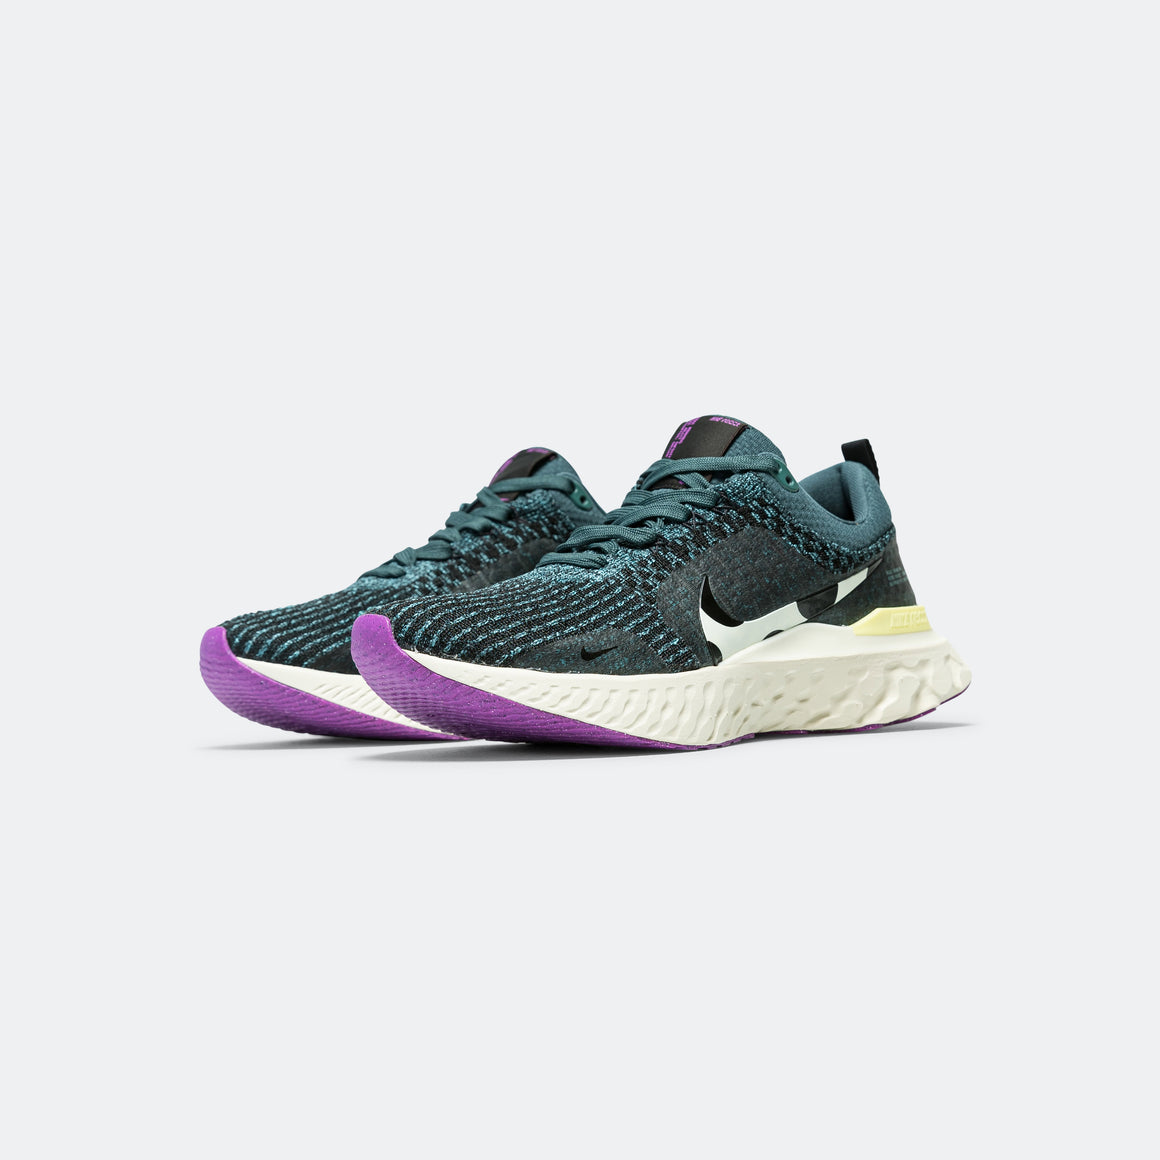 Nike - Mens React Infinity Run FK 3 - Mineral Teal/Black-Faded Spruce - Up There Athletics